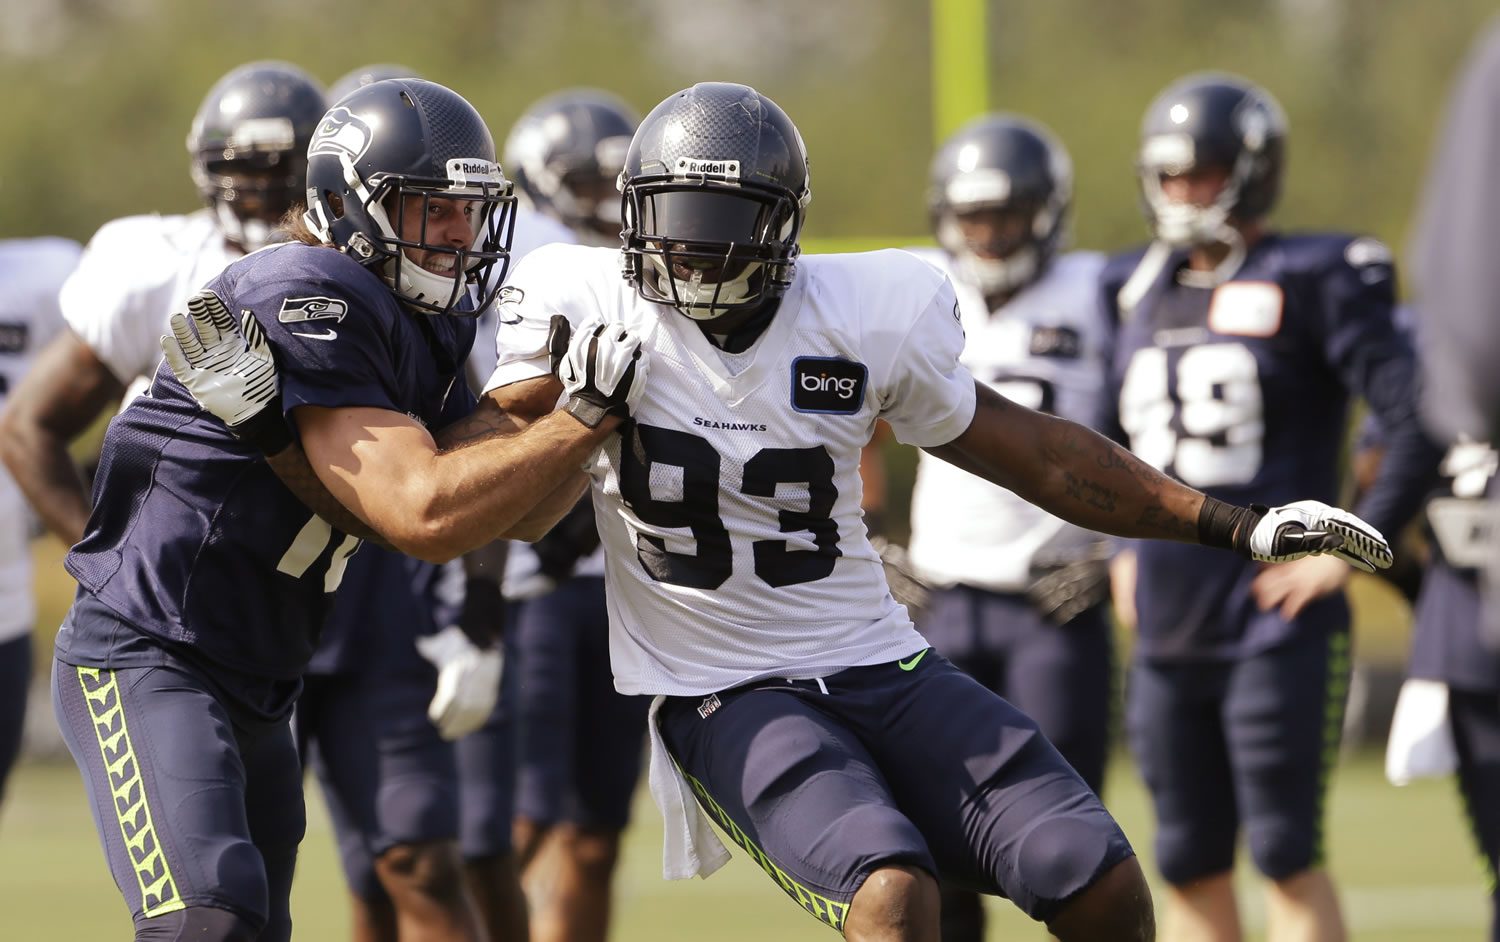 Seattle Seahawks' Brett Swain, left, shoves against O'Brien Schofield during NFL football training camp Tuesday, July 30, 2013, in Renton, Wash.